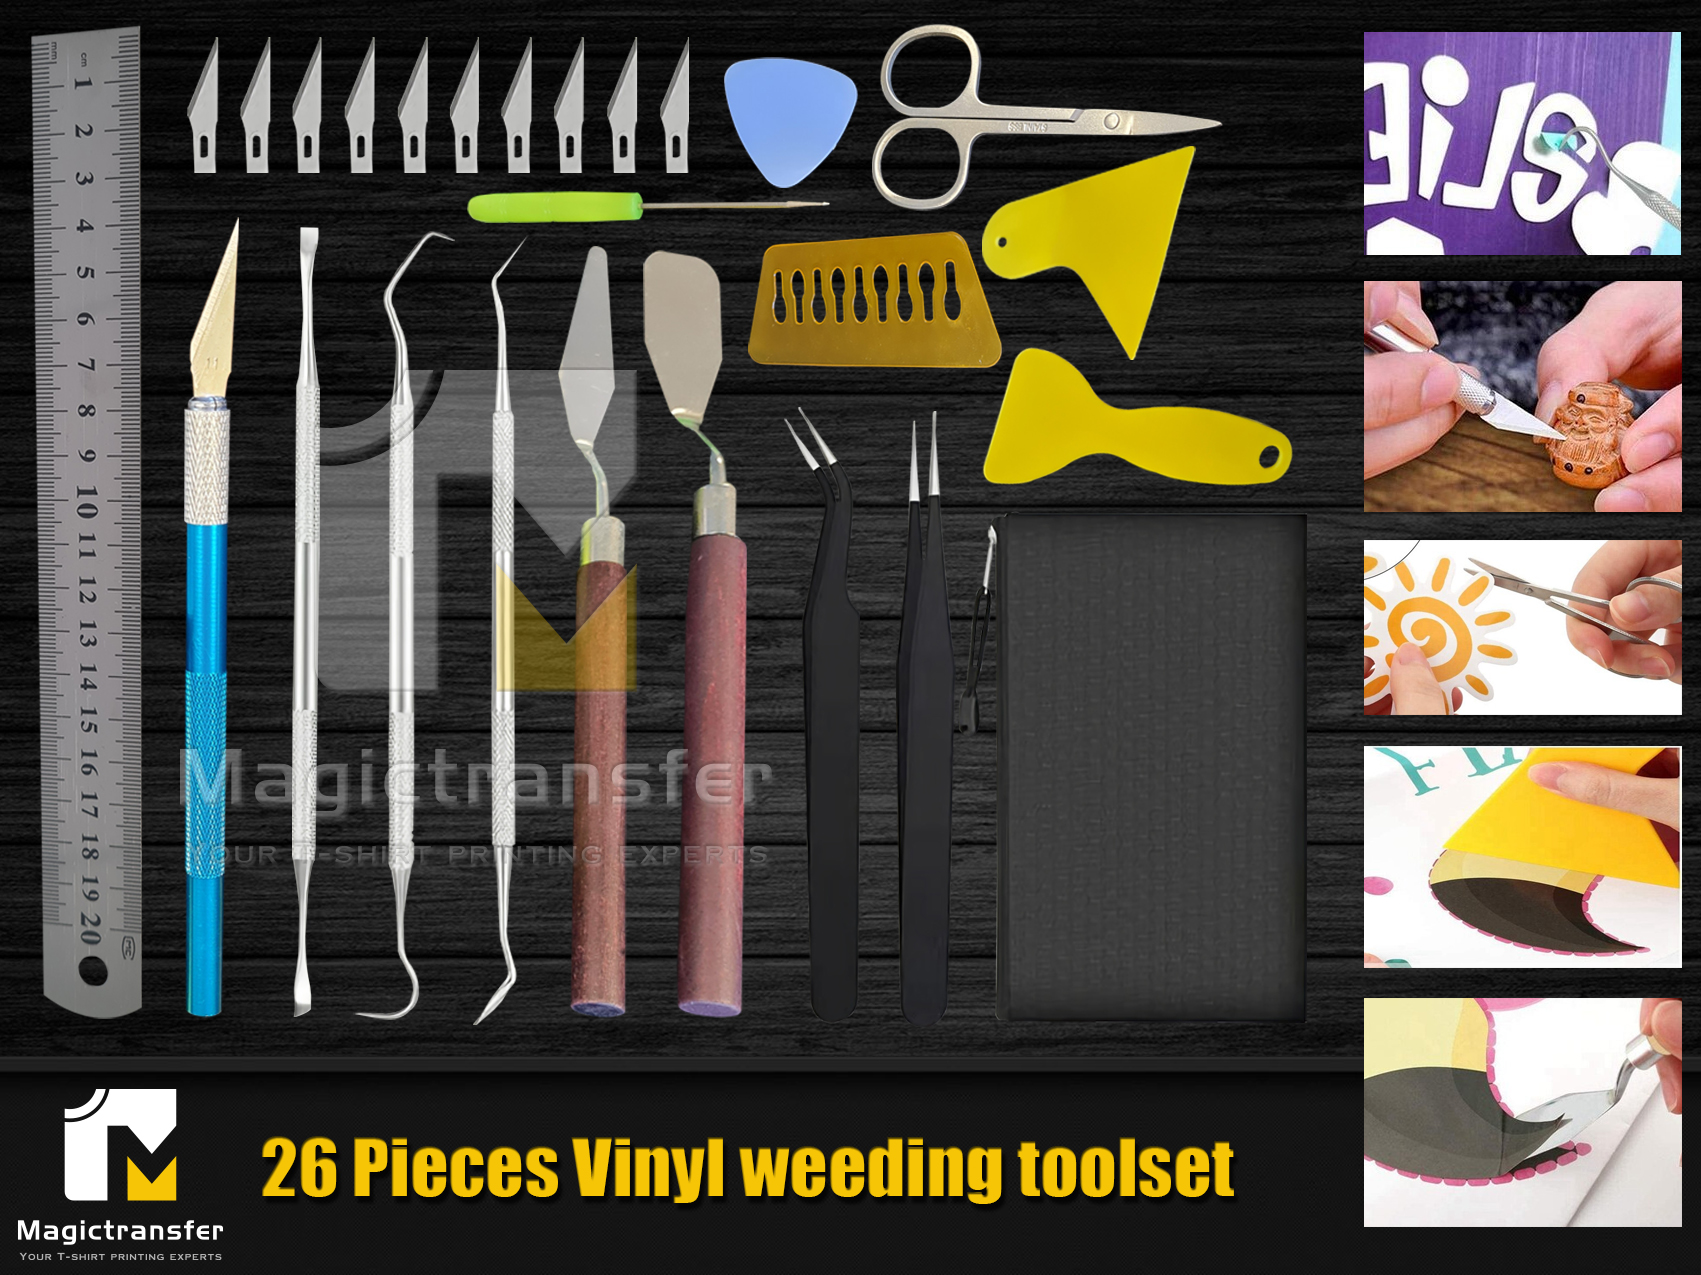 5-Piece Set Craft Vinyl Weeding Tools Set Spatula/Scissors with  Cap/Piercing Tool/Weeder/Tweezers/Scraper Basic Weeding Tool Kit Perfect  for Vinyl, Paper, Iron-on Projects, and More.